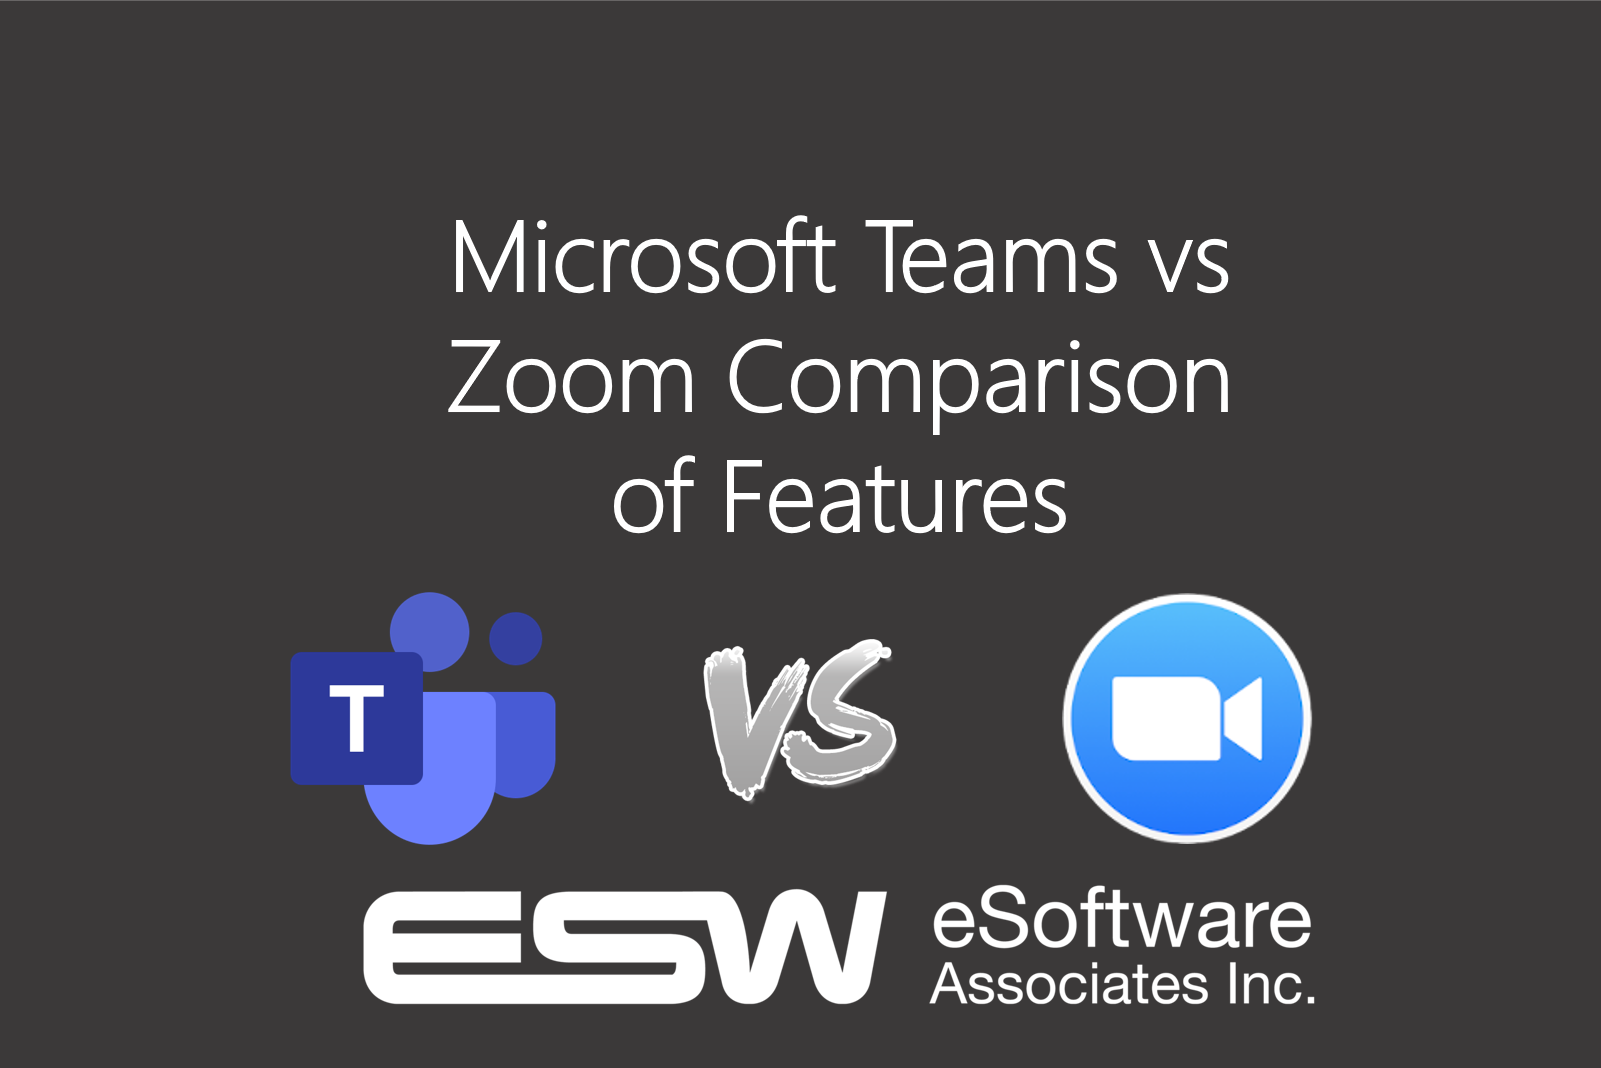 Learn About Microsoft Teams vs Zoom Comparison of Features